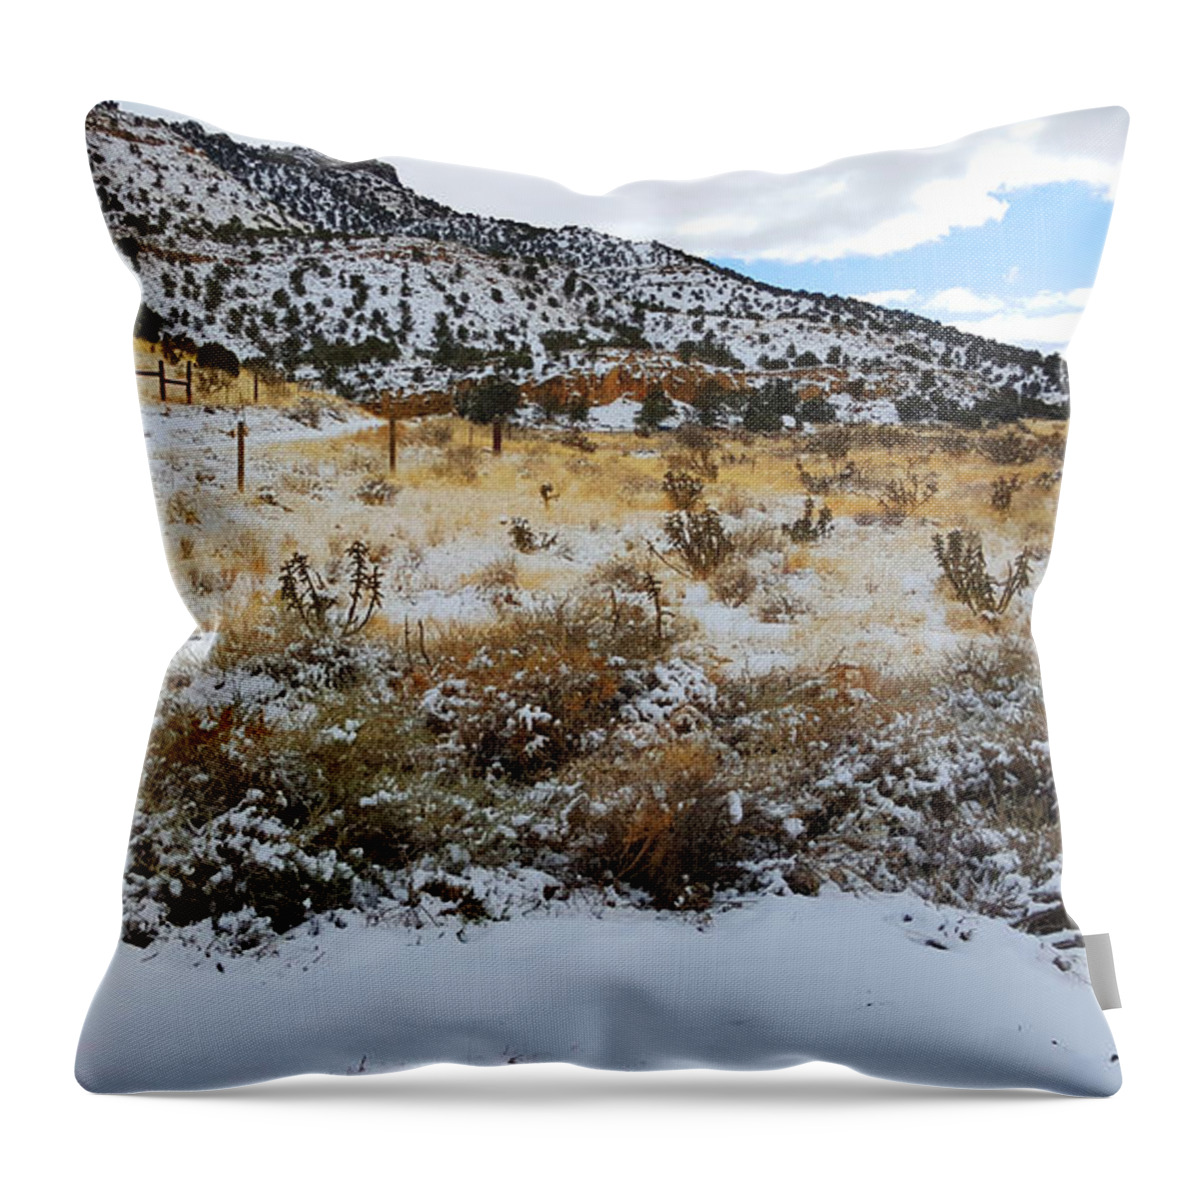 Southwest Landscape Throw Pillow featuring the photograph Cactus in the snow by Robert WK Clark